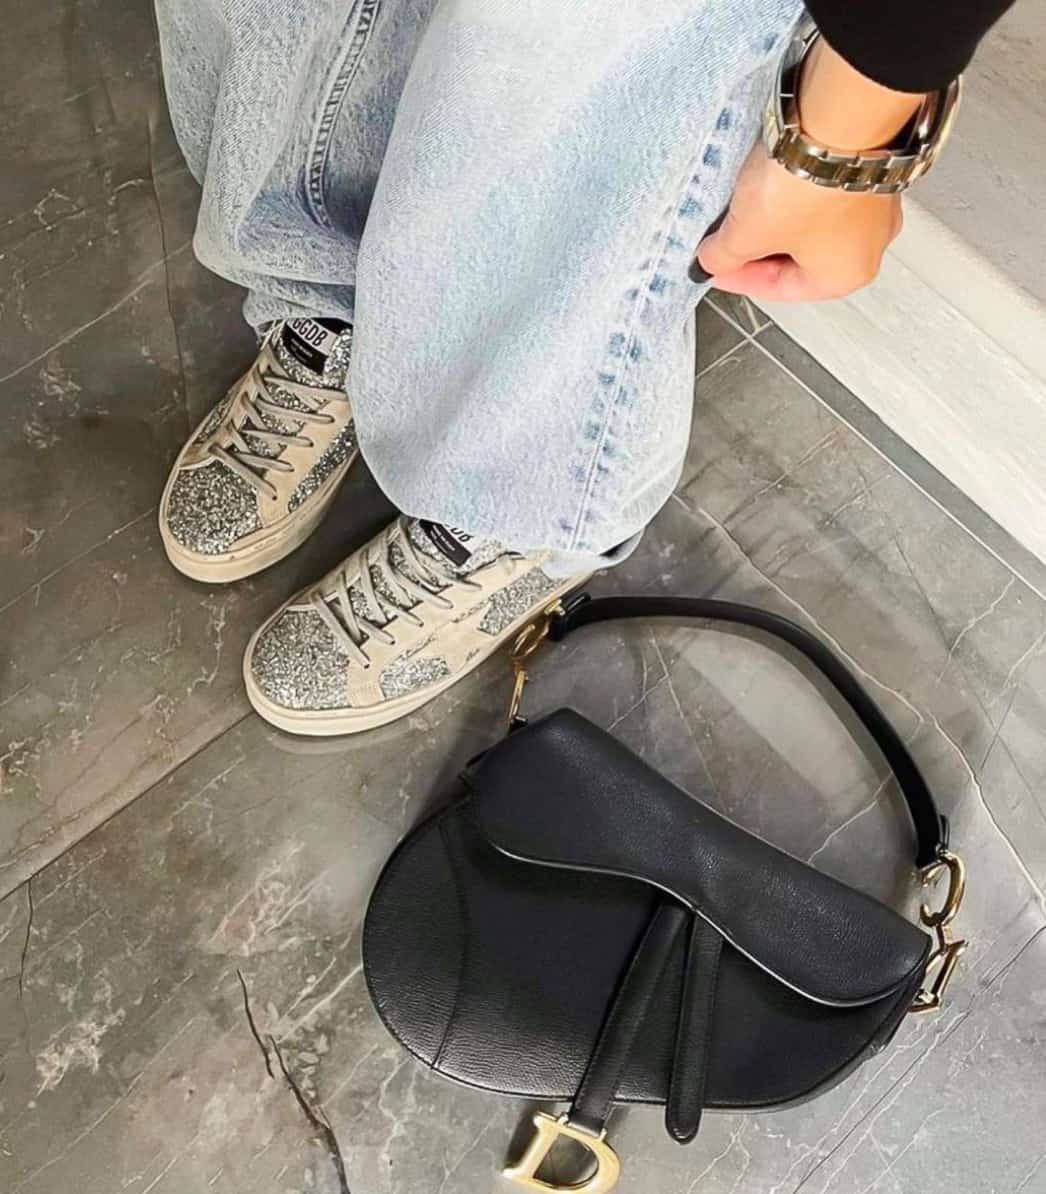 Womans legs in jeans wearing golden goose sneakers with a Dior saddle bag on the floor beside her feet